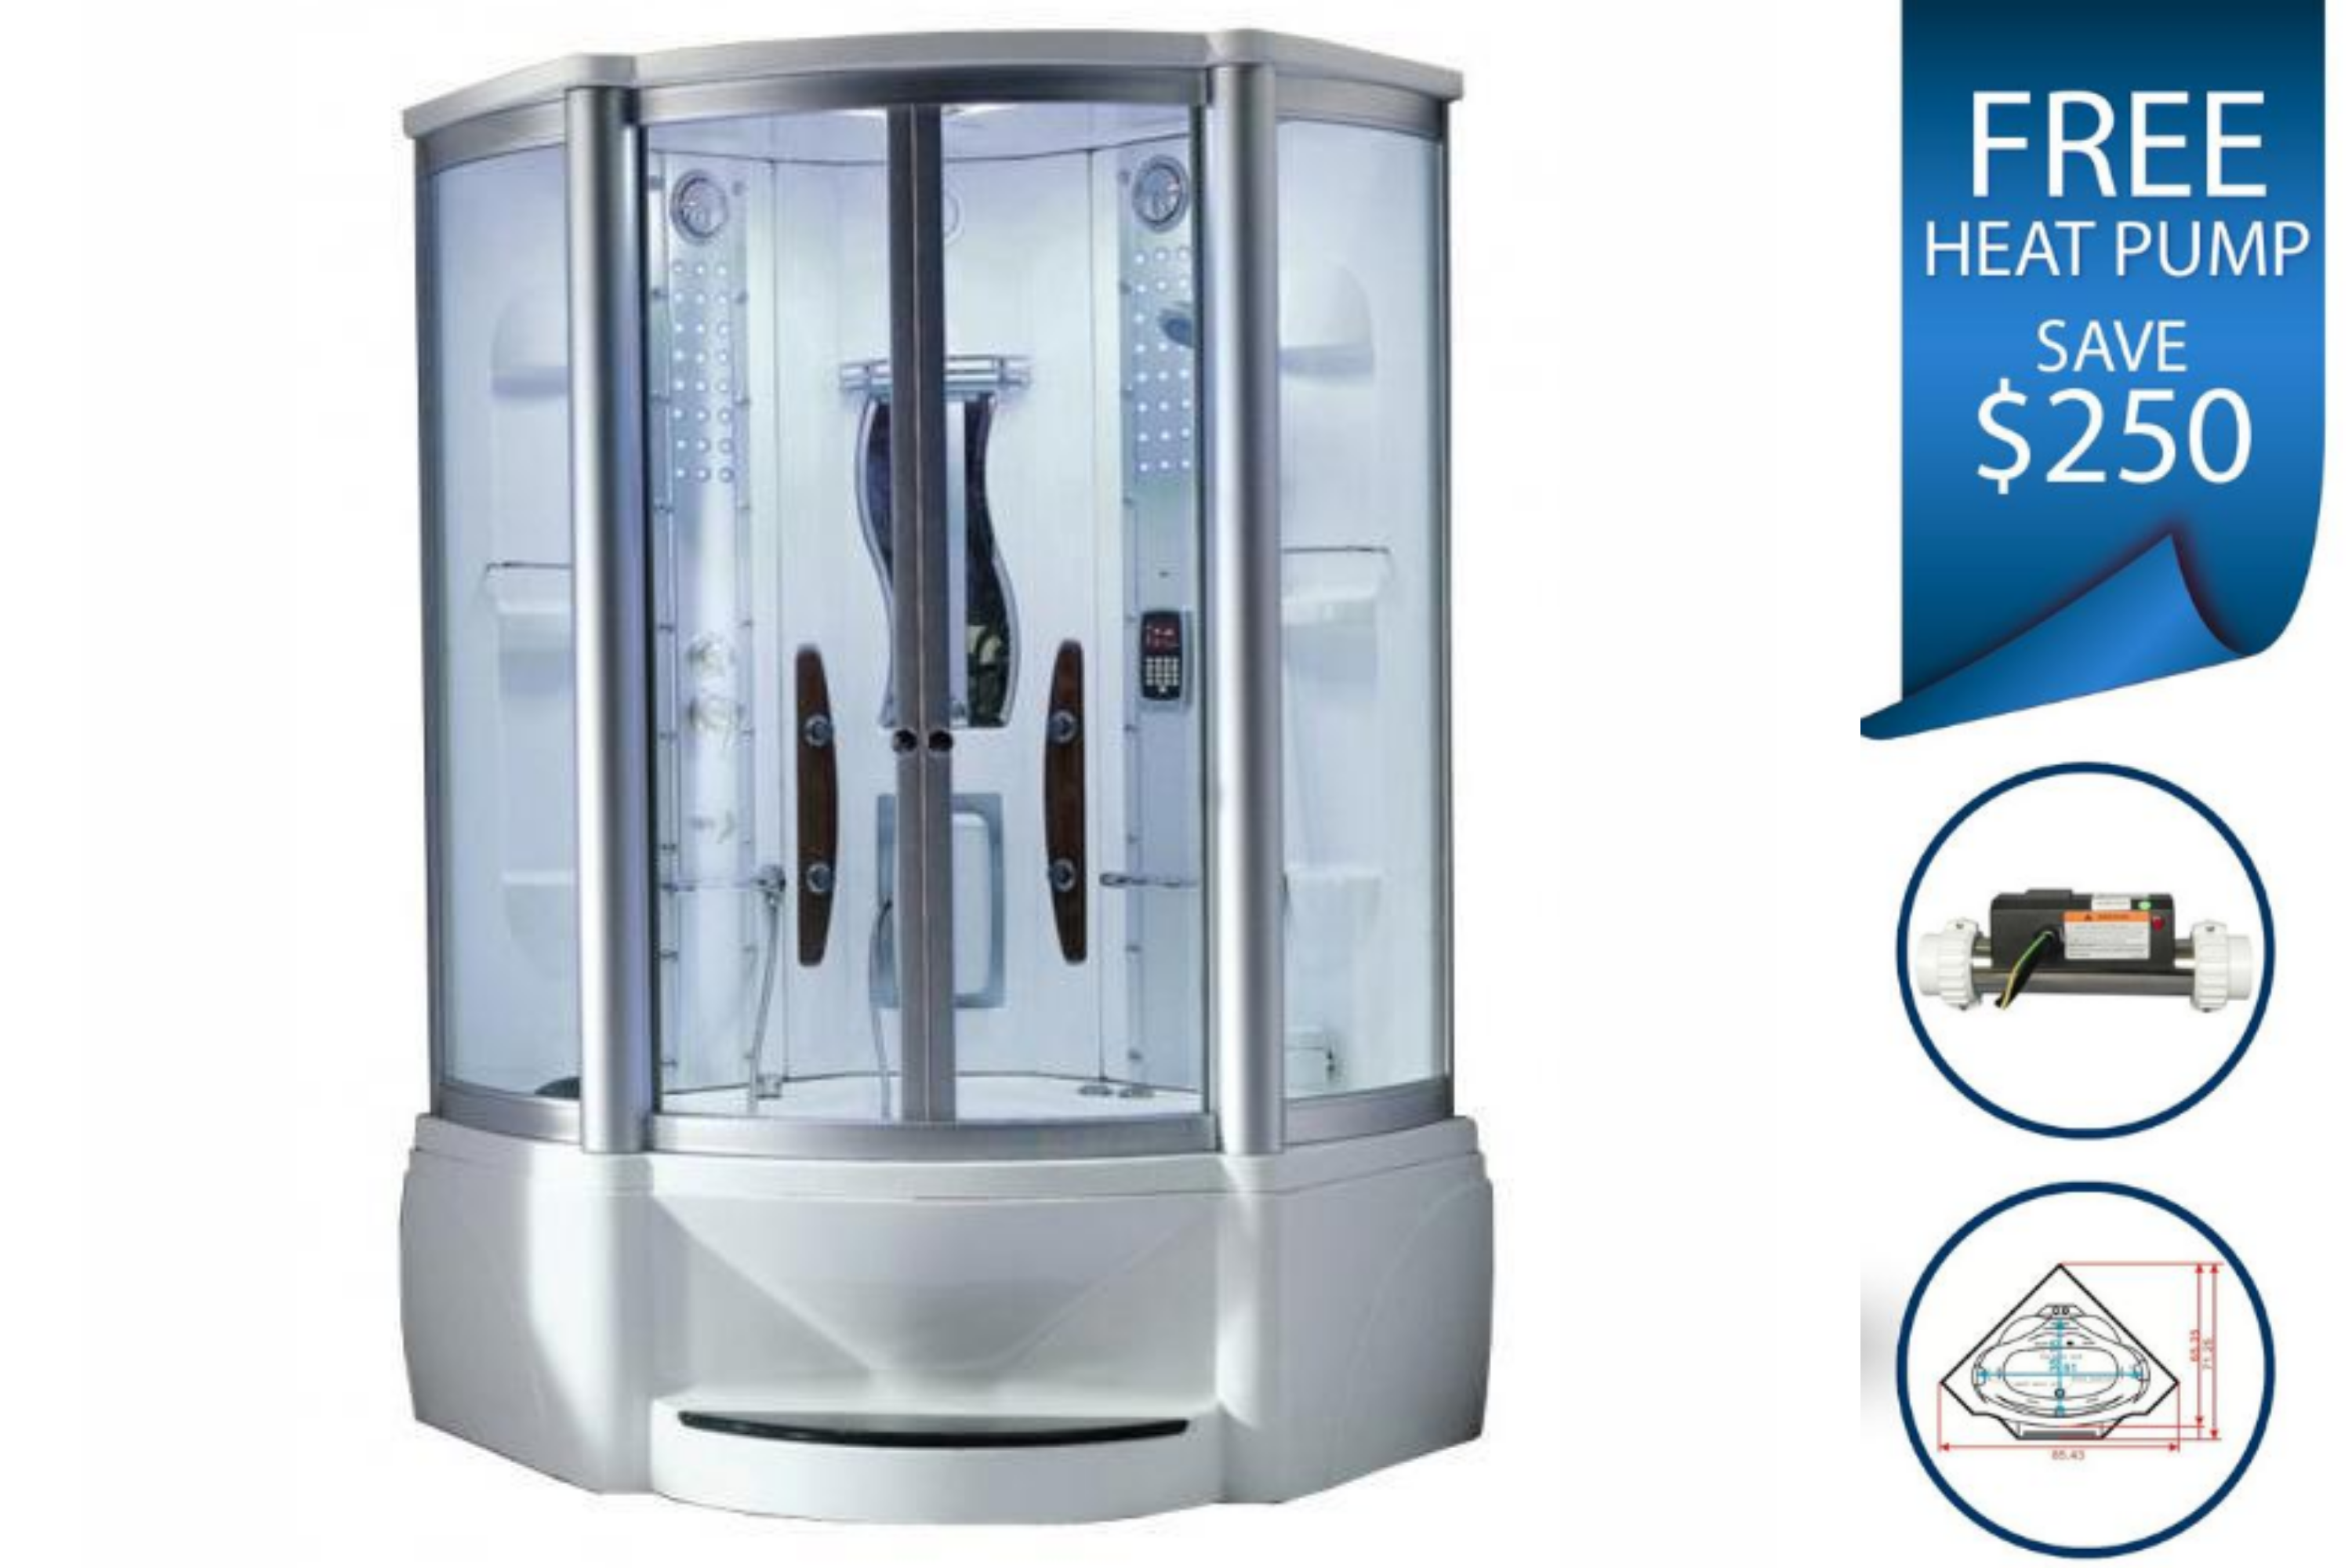 Mesa WS-609A Steam Shower Tub Combo - 48" x 48" x 85" - Buy Online